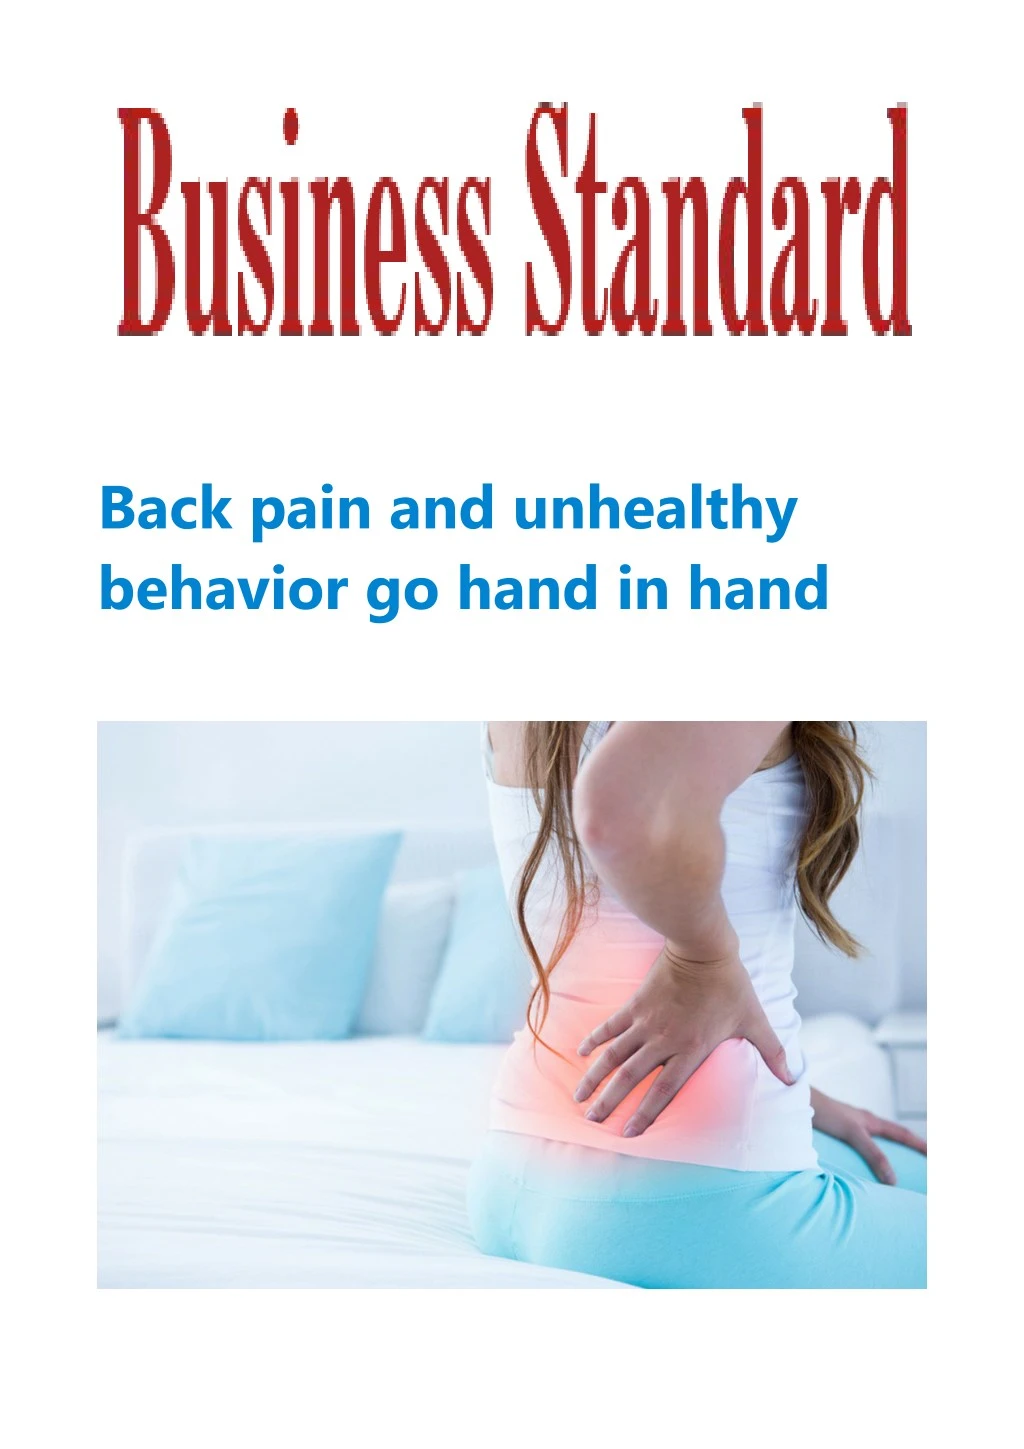 back pain and unhealthy behavior go hand in hand